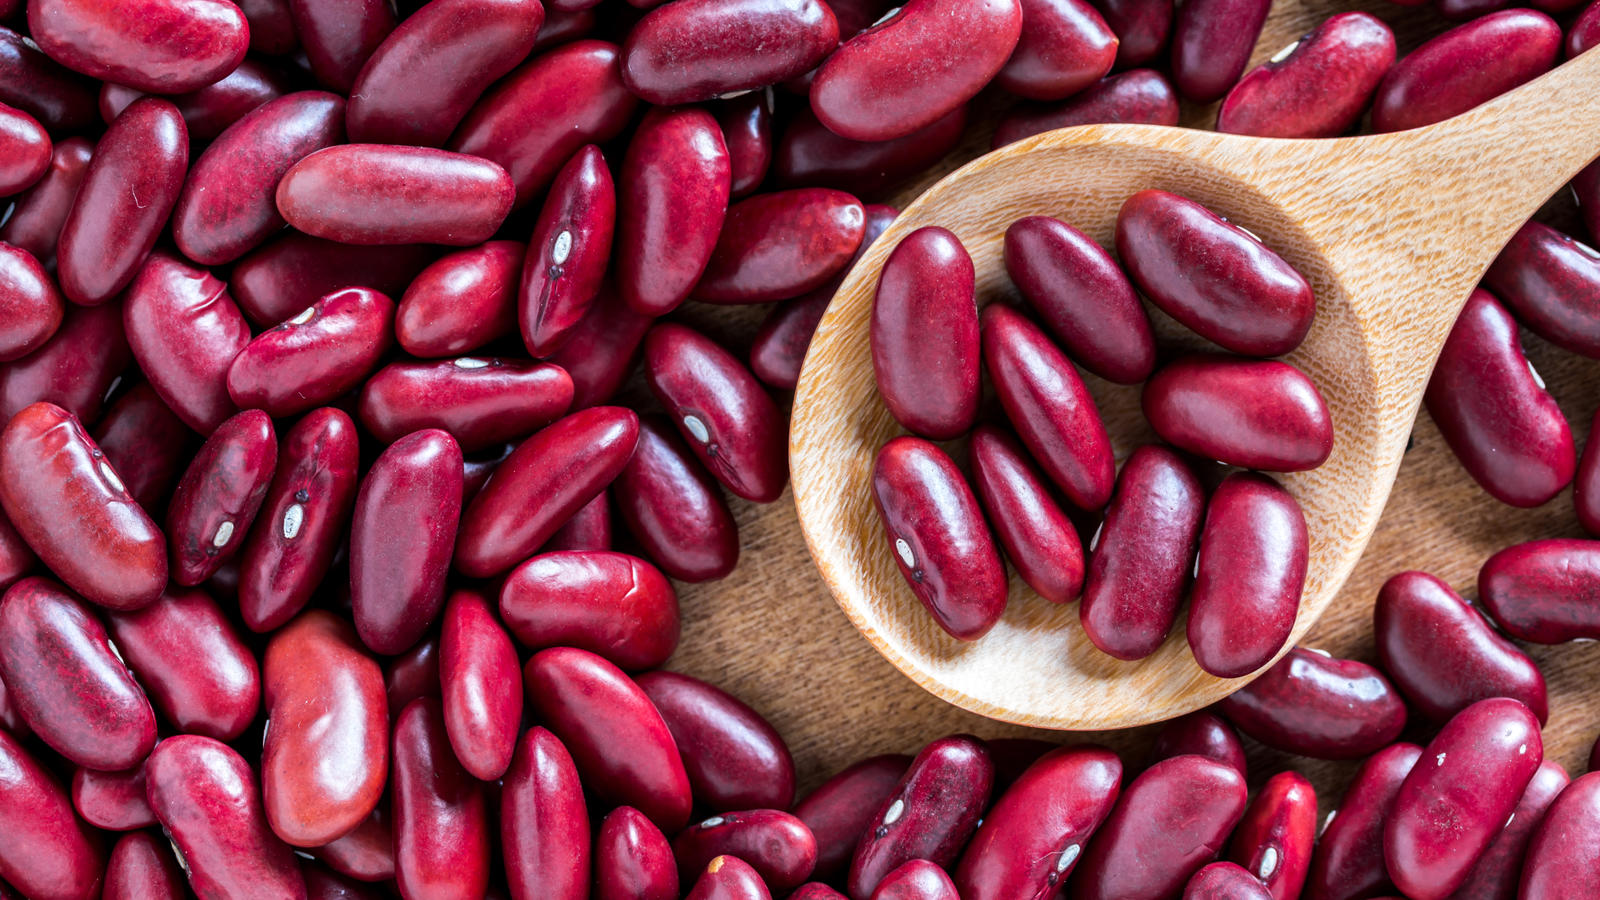 Only an Adventurous Eater Will Have Eaten at Least 13/25 of These Foods kidney beans